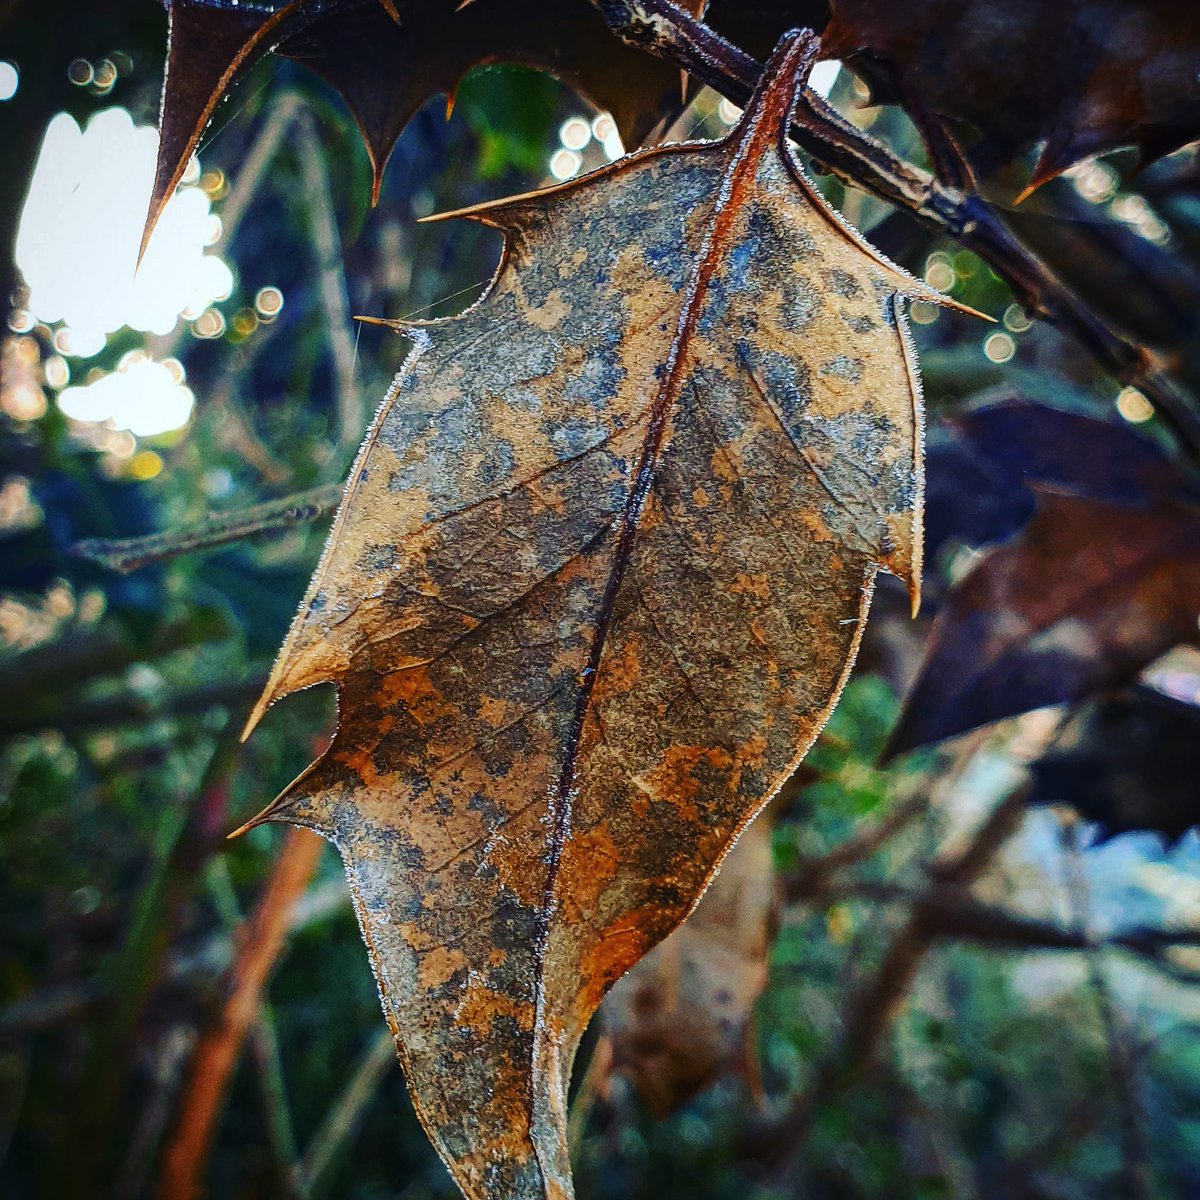 The leaf wears last year, a gown of fine patina, between earth and air. #naturepoetry #nature #poetry #poetrycommunity  #naturephotography #poem #naturelovers #poetrylovers #naturepoem #poems #naturepoems  #poet #writingcommunity #photography #haiku  #haikupoem #haikupoetry